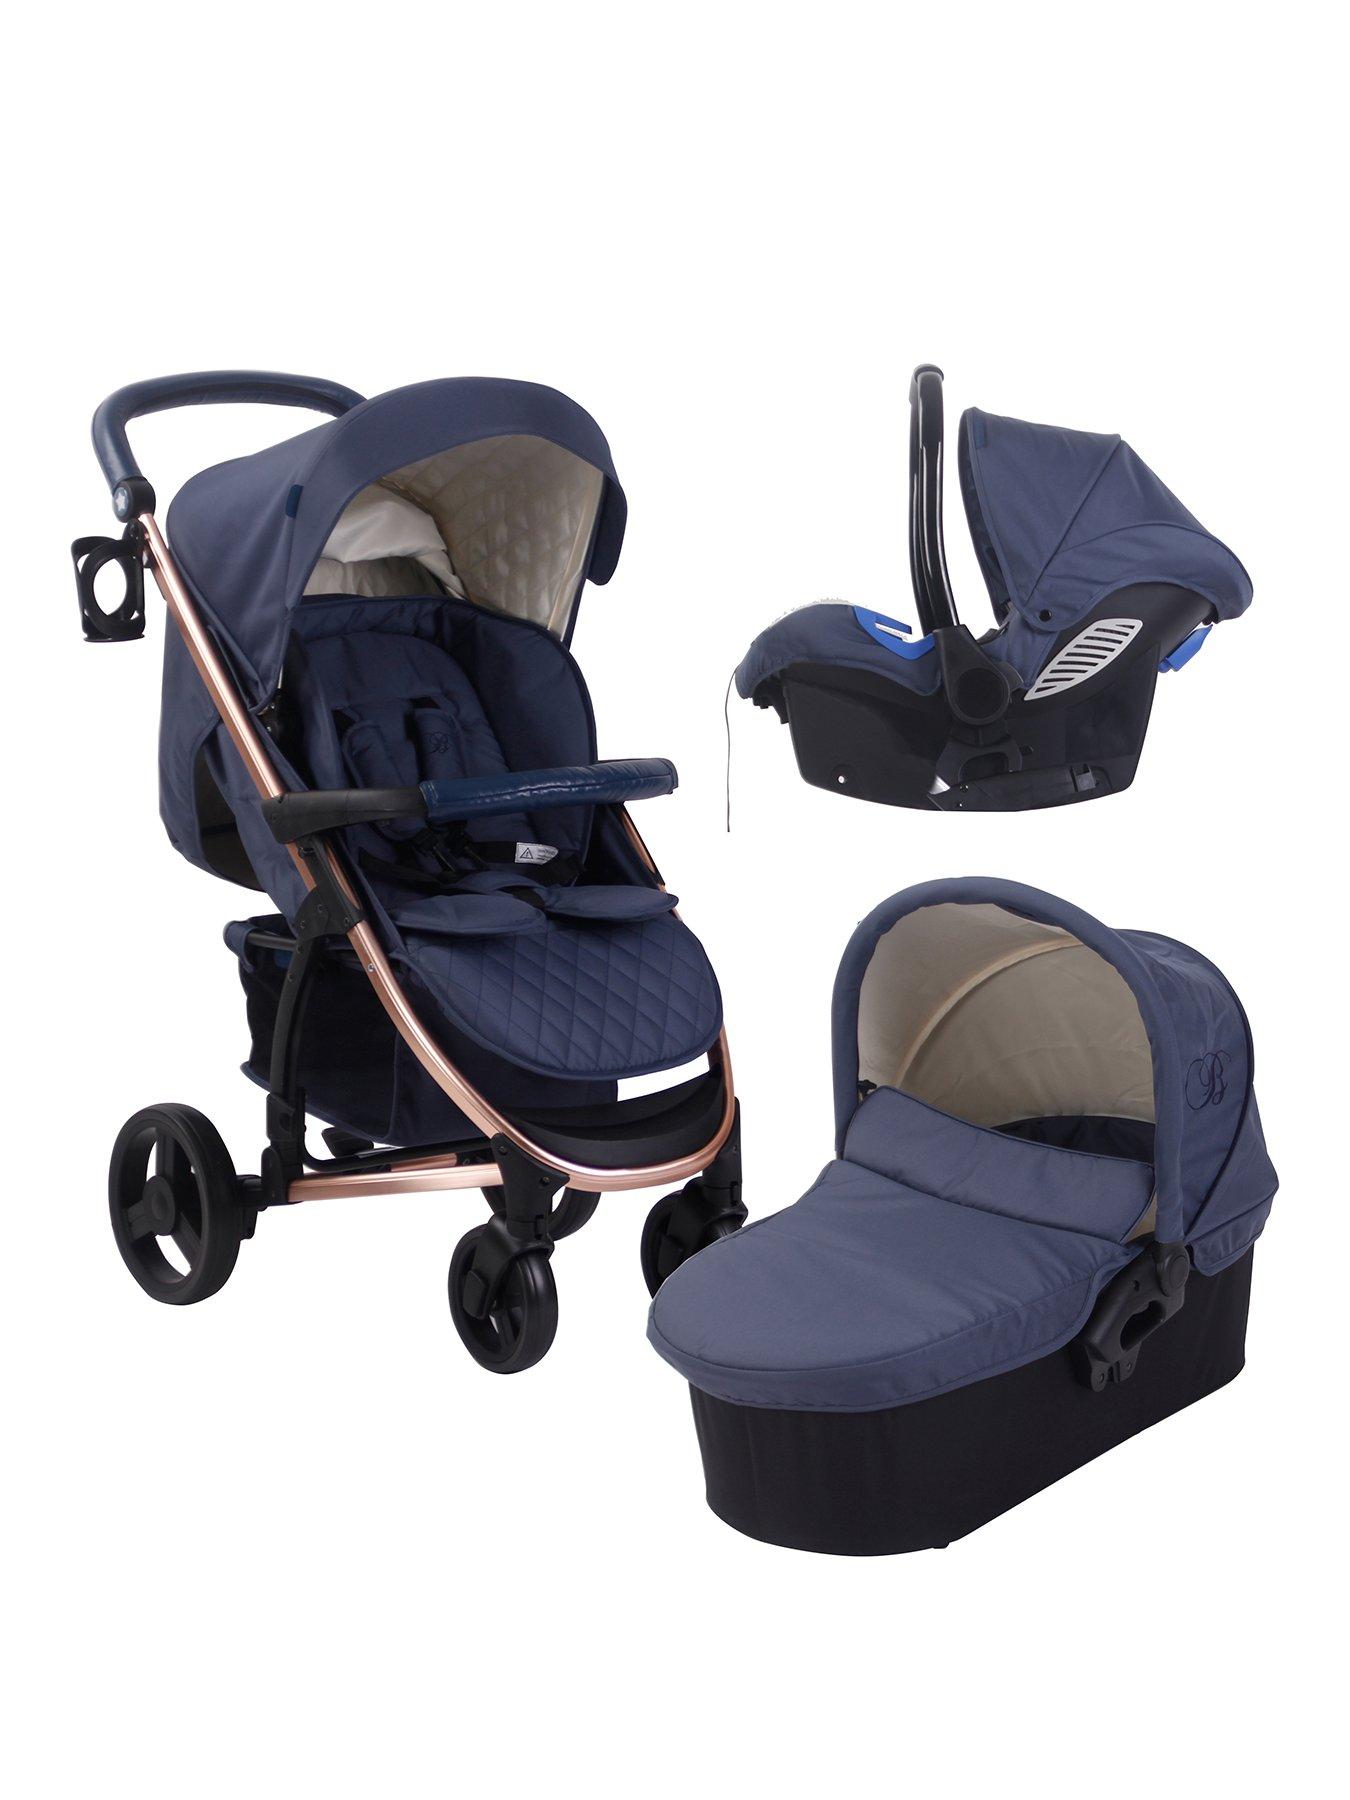 my babiie rose gold and navy travel system